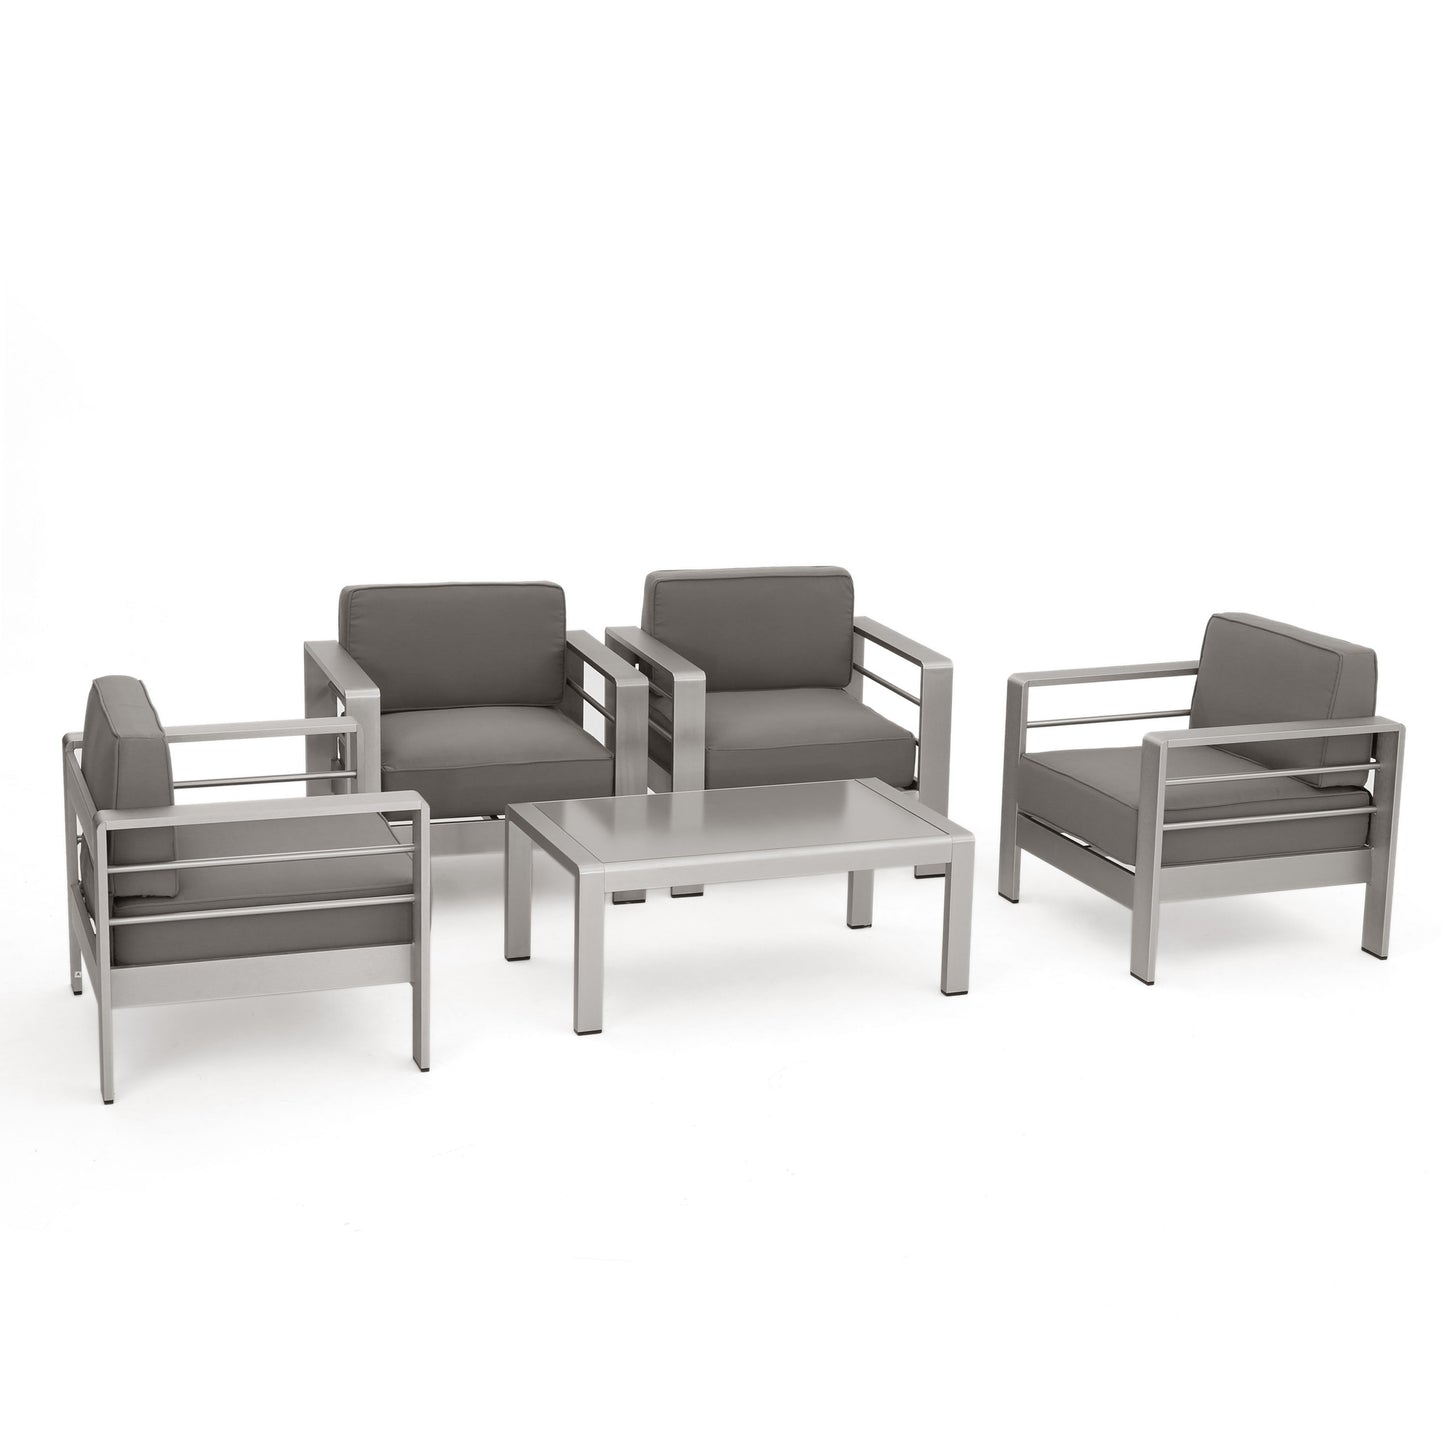 Coral Bay Outdoor 5-Piece Aluminum Chat Set with Water Resistant Cushions